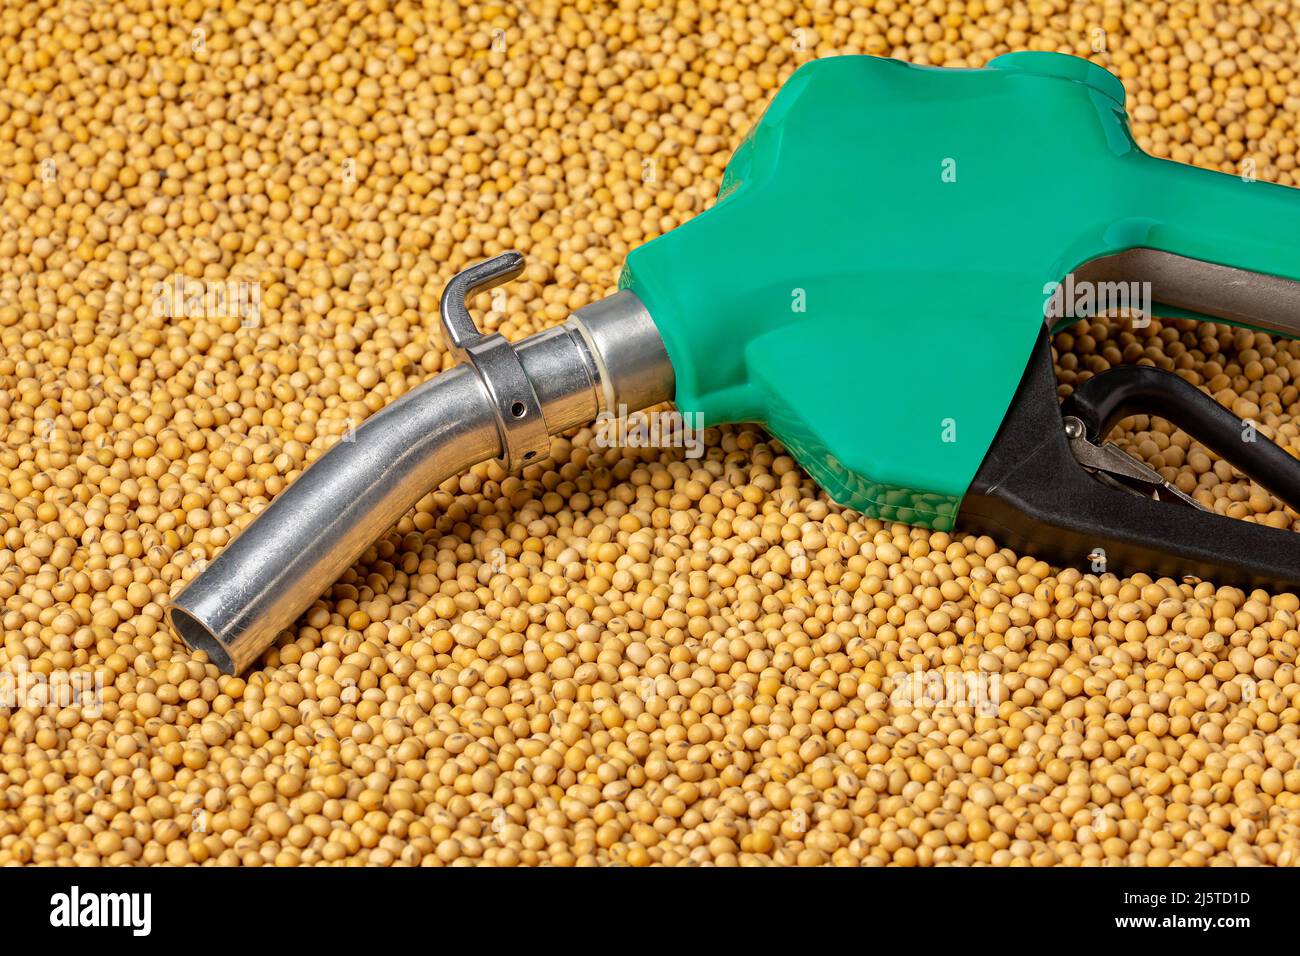 Diesel fuel nozzle and soybeans. Biodiesel, biofuel, agriculture and renewable clean energy concept. Stock Photo